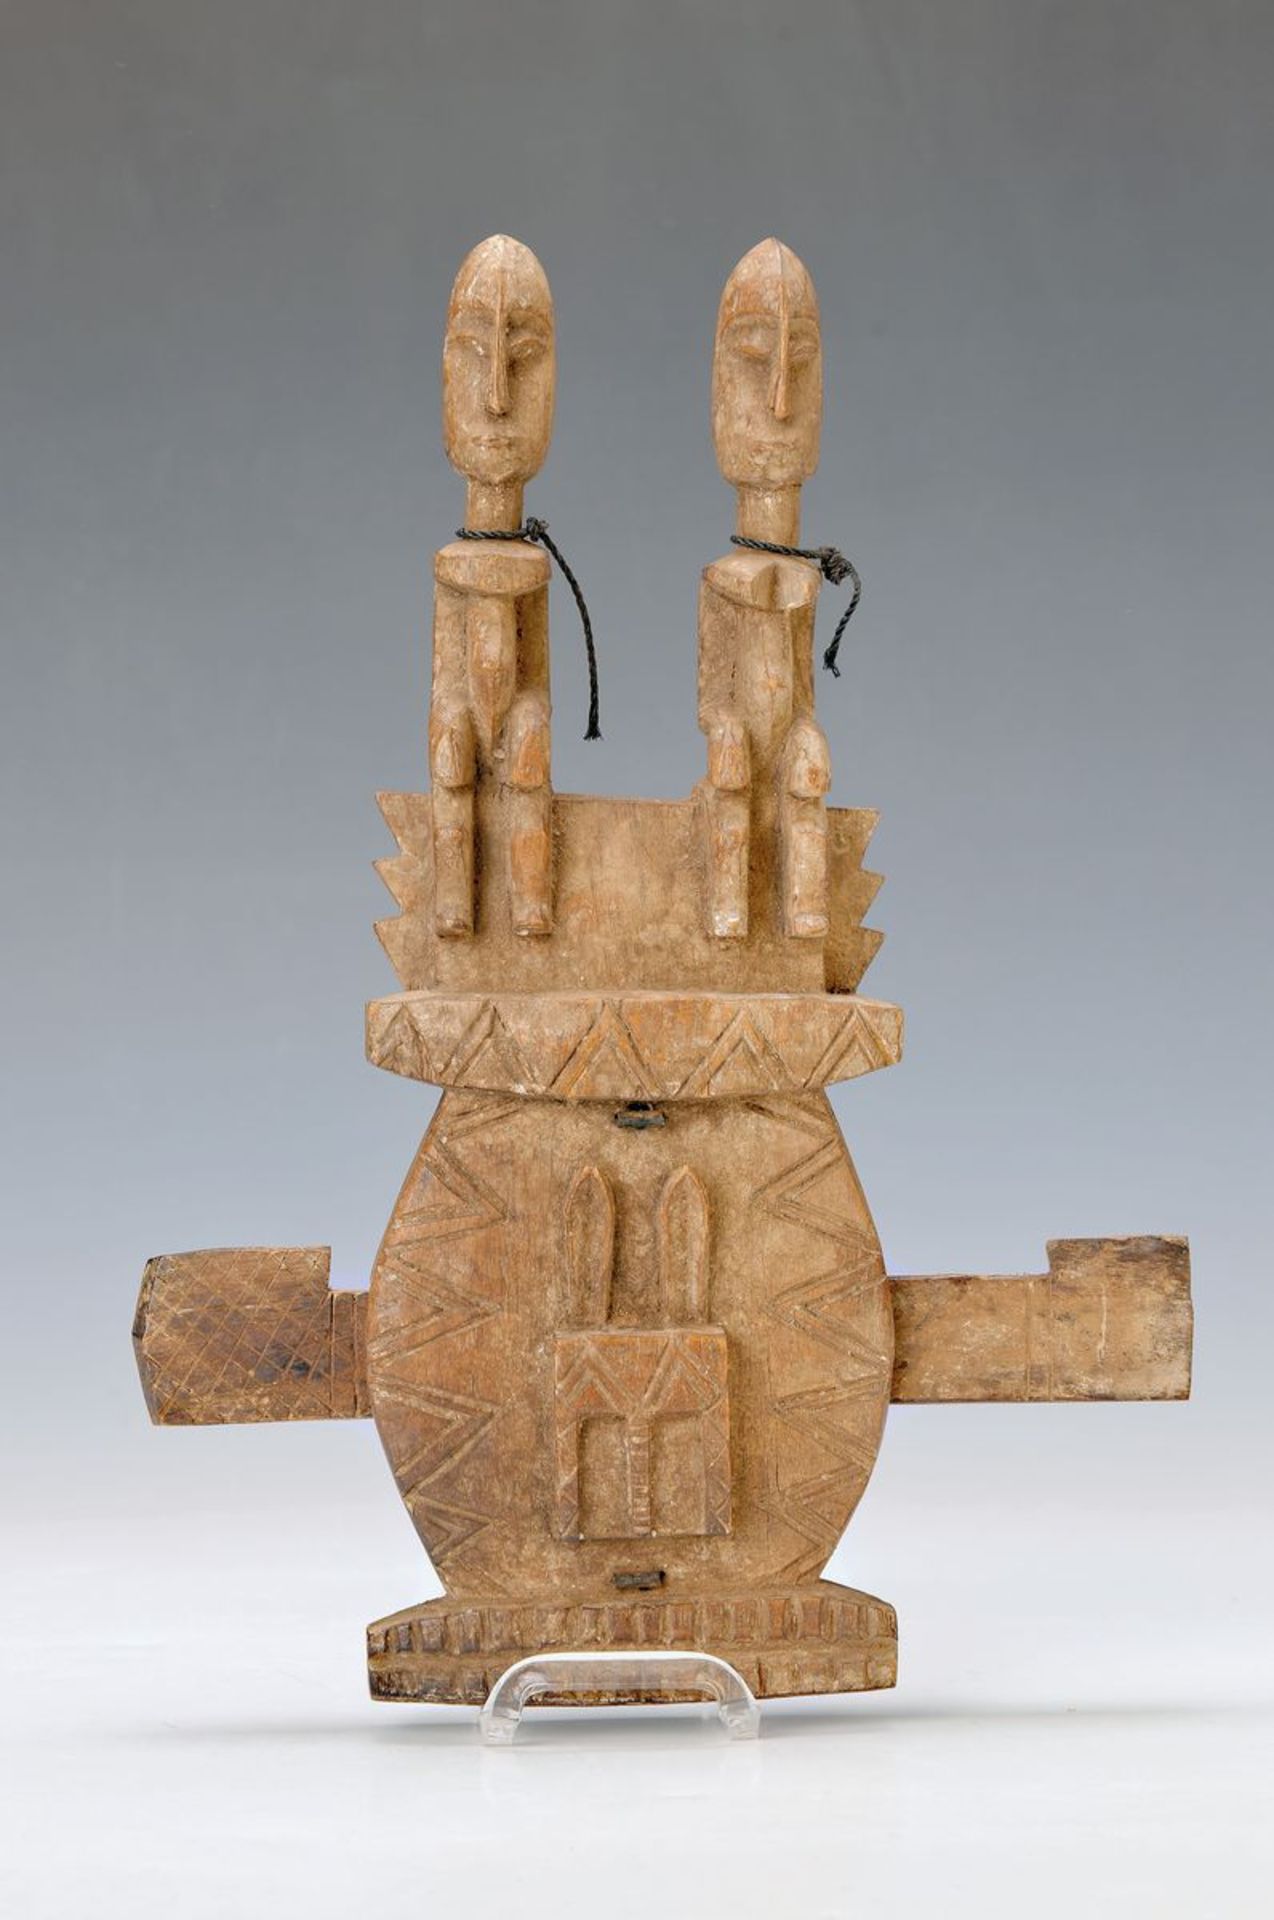 storage room lock of the Dogon, Mali, approx. 60 years old, carved wood with couple as crownand flat